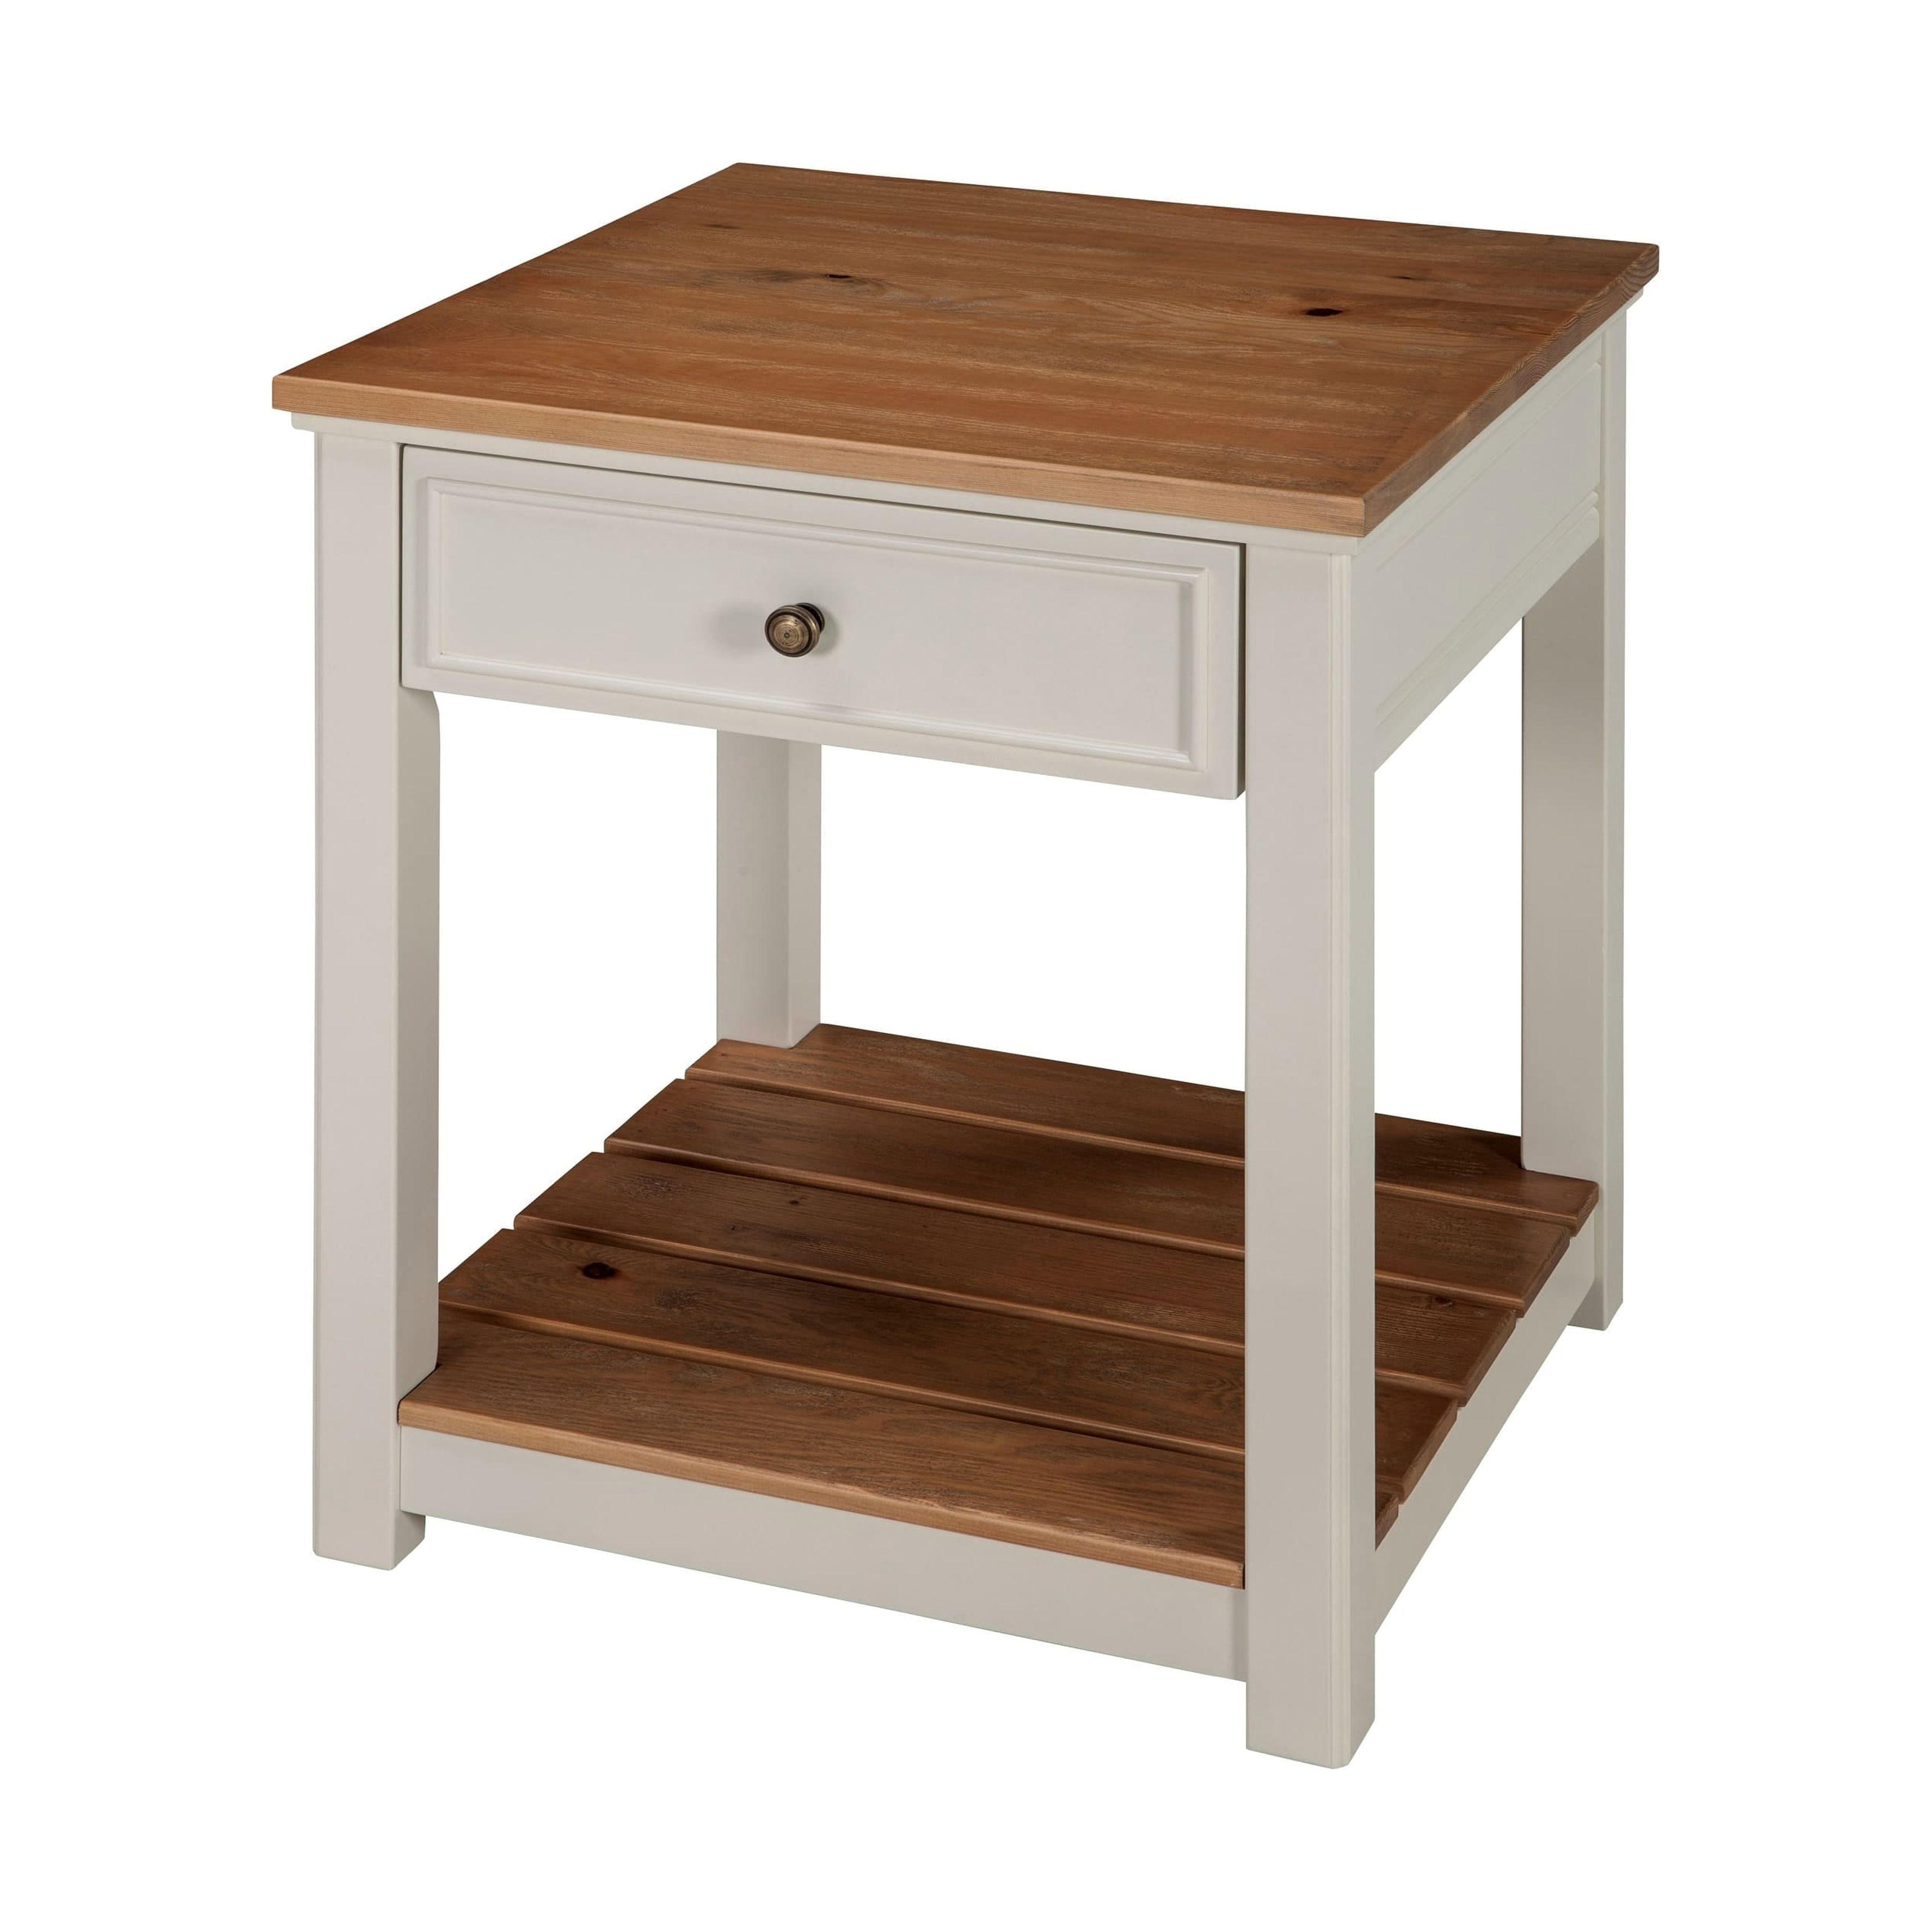 Savannah Coastal Ivory End Table with Natural Wood Top and Storage